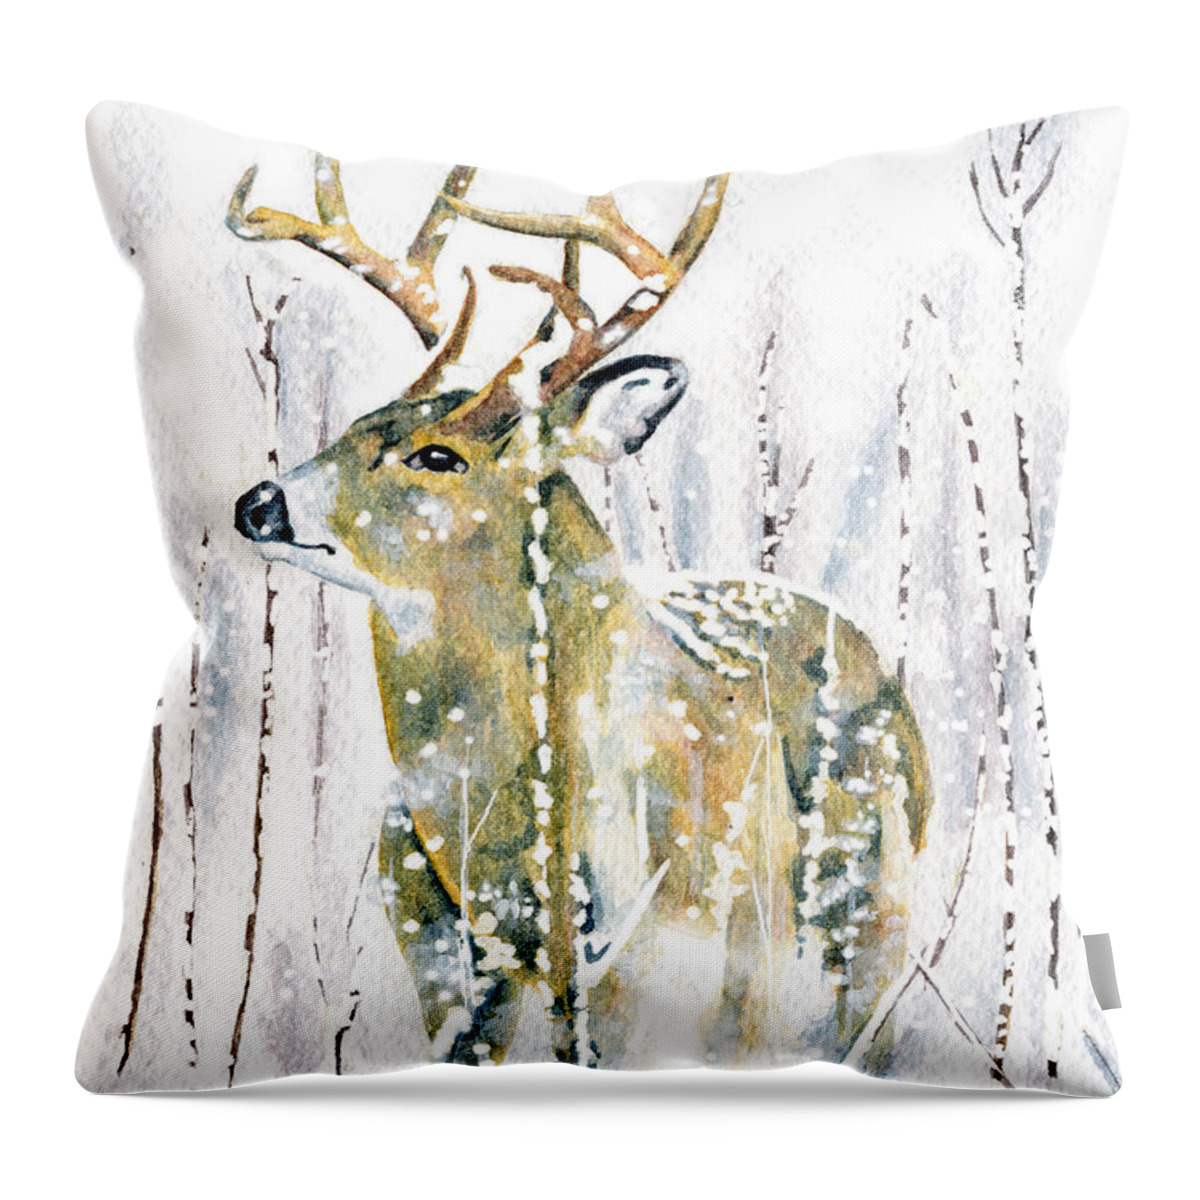 Stag Throw Pillow featuring the painting Winter Deer by Antony Galbraith